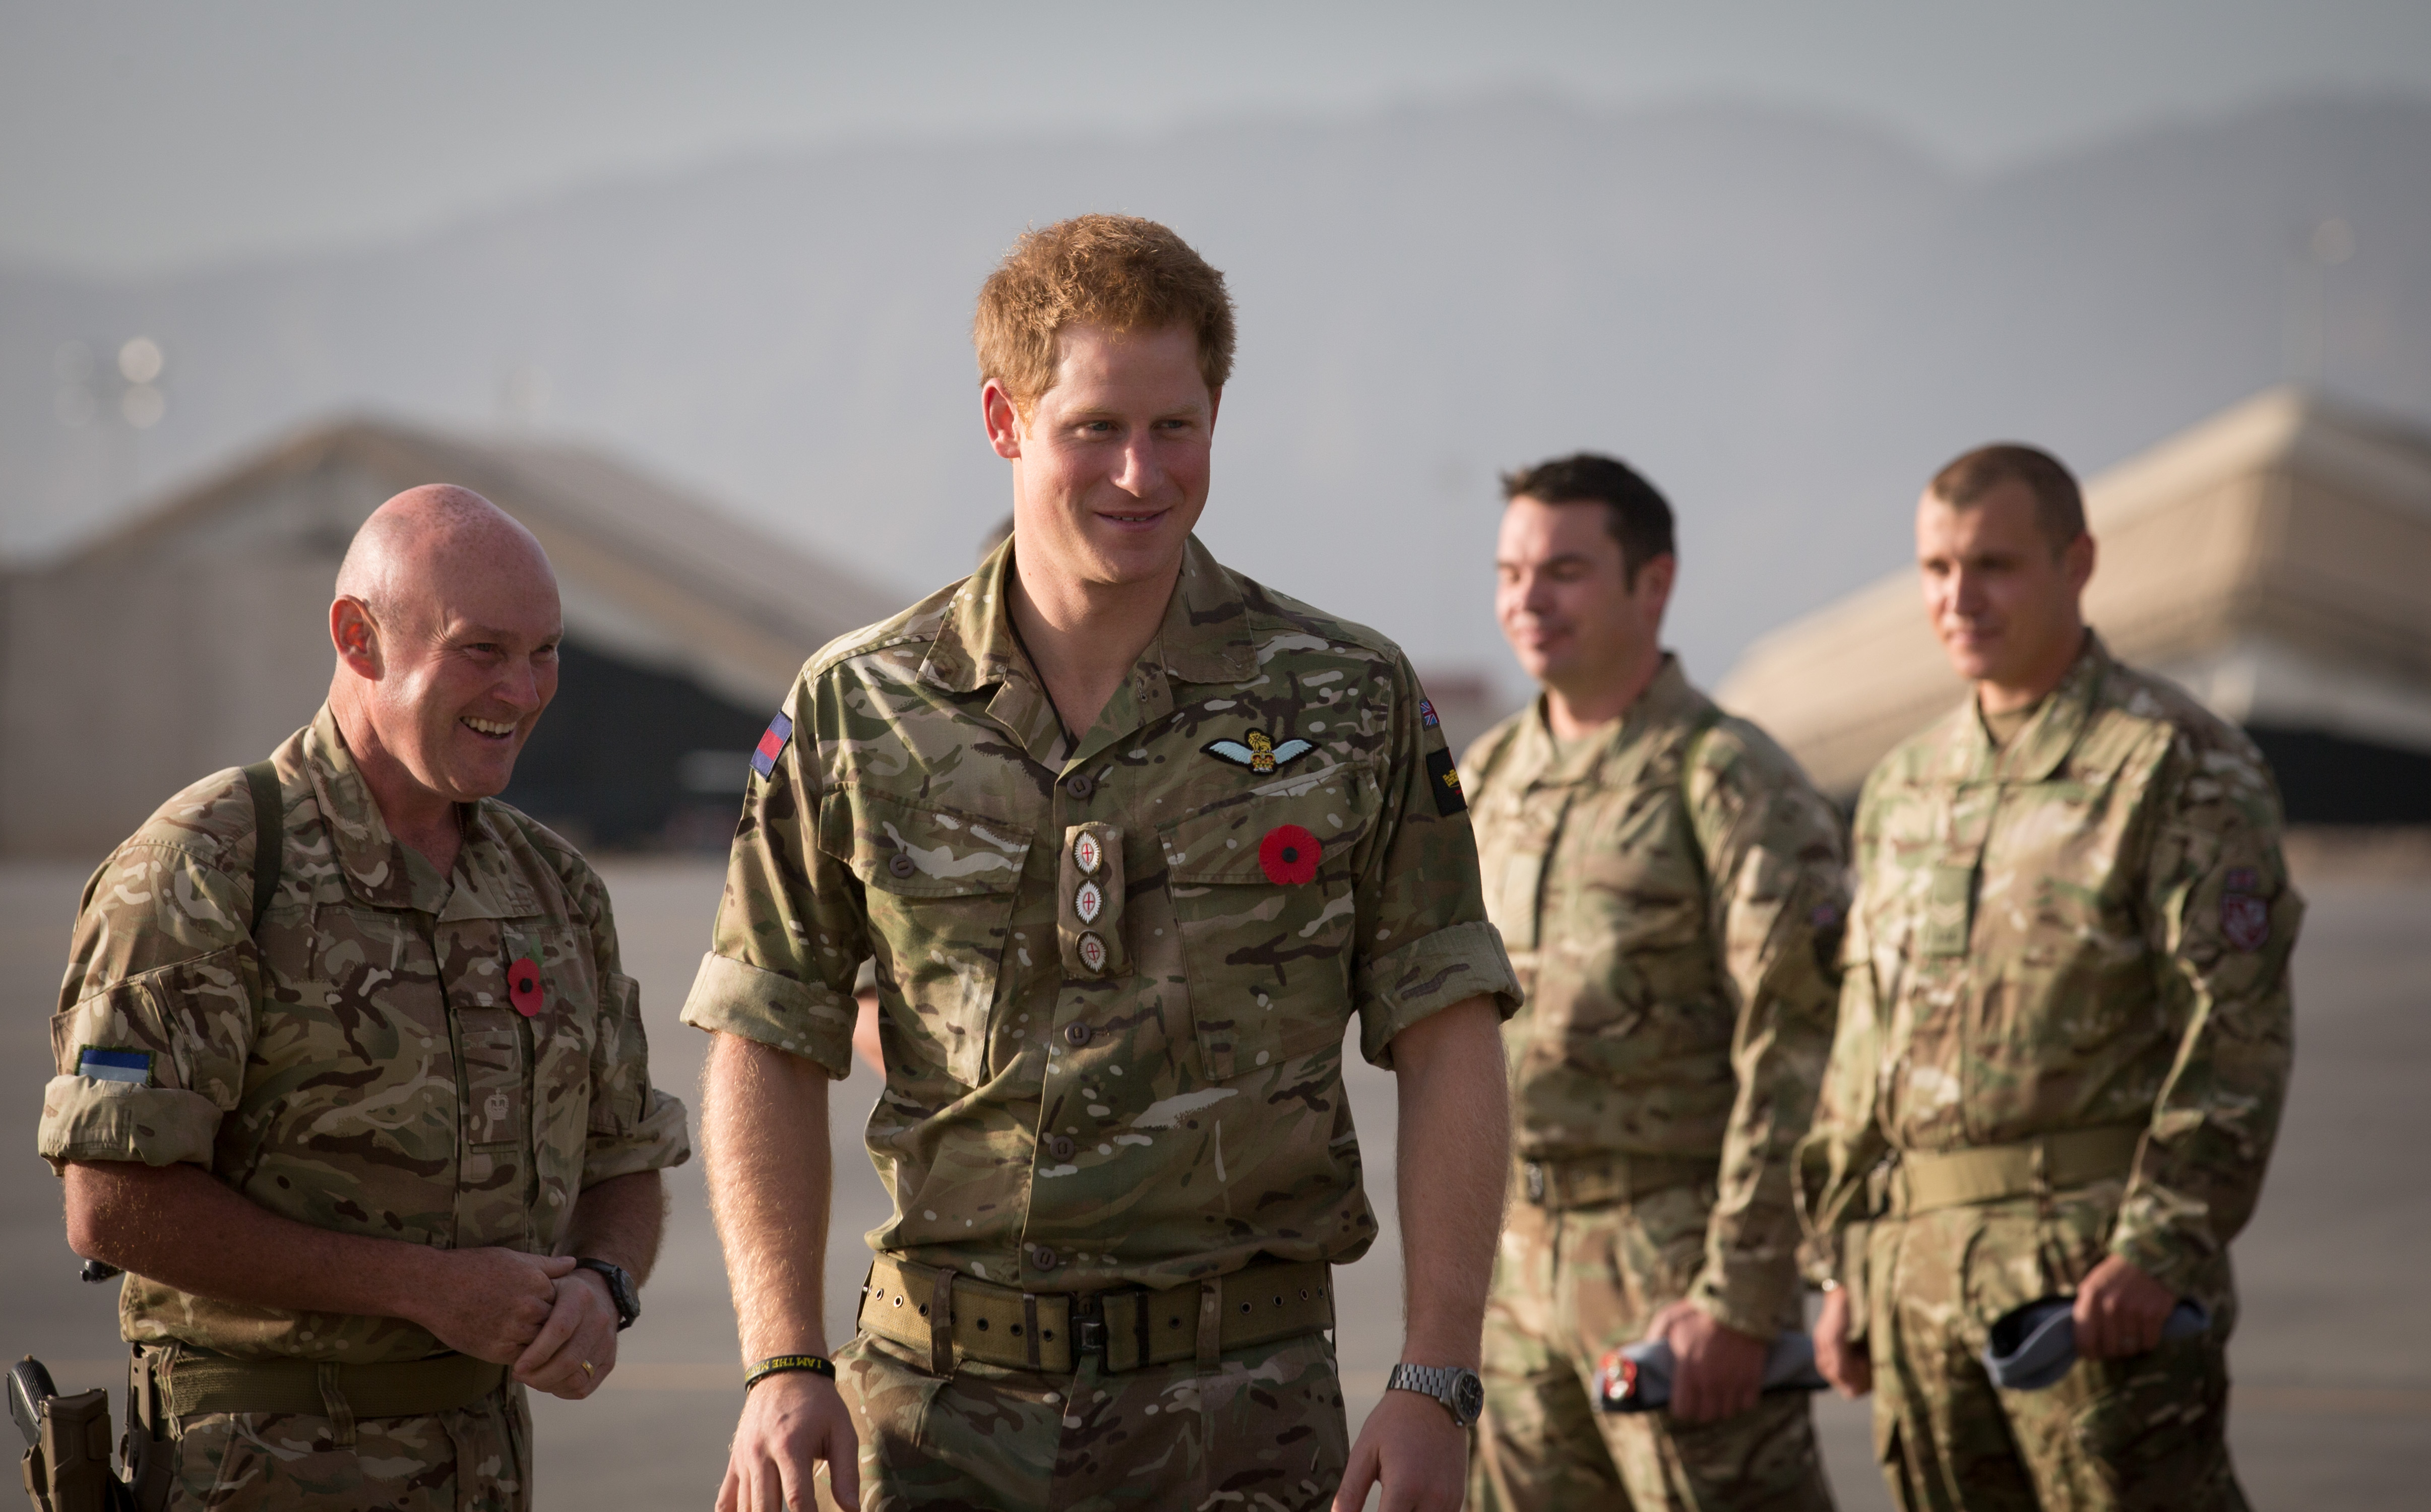 Prince Harry meeting up with British service personel following a Remembrance Sunday service at Kandahar Airfield in Kandahar, Afghanistan on November 9, 2014 | Source: Getty Images